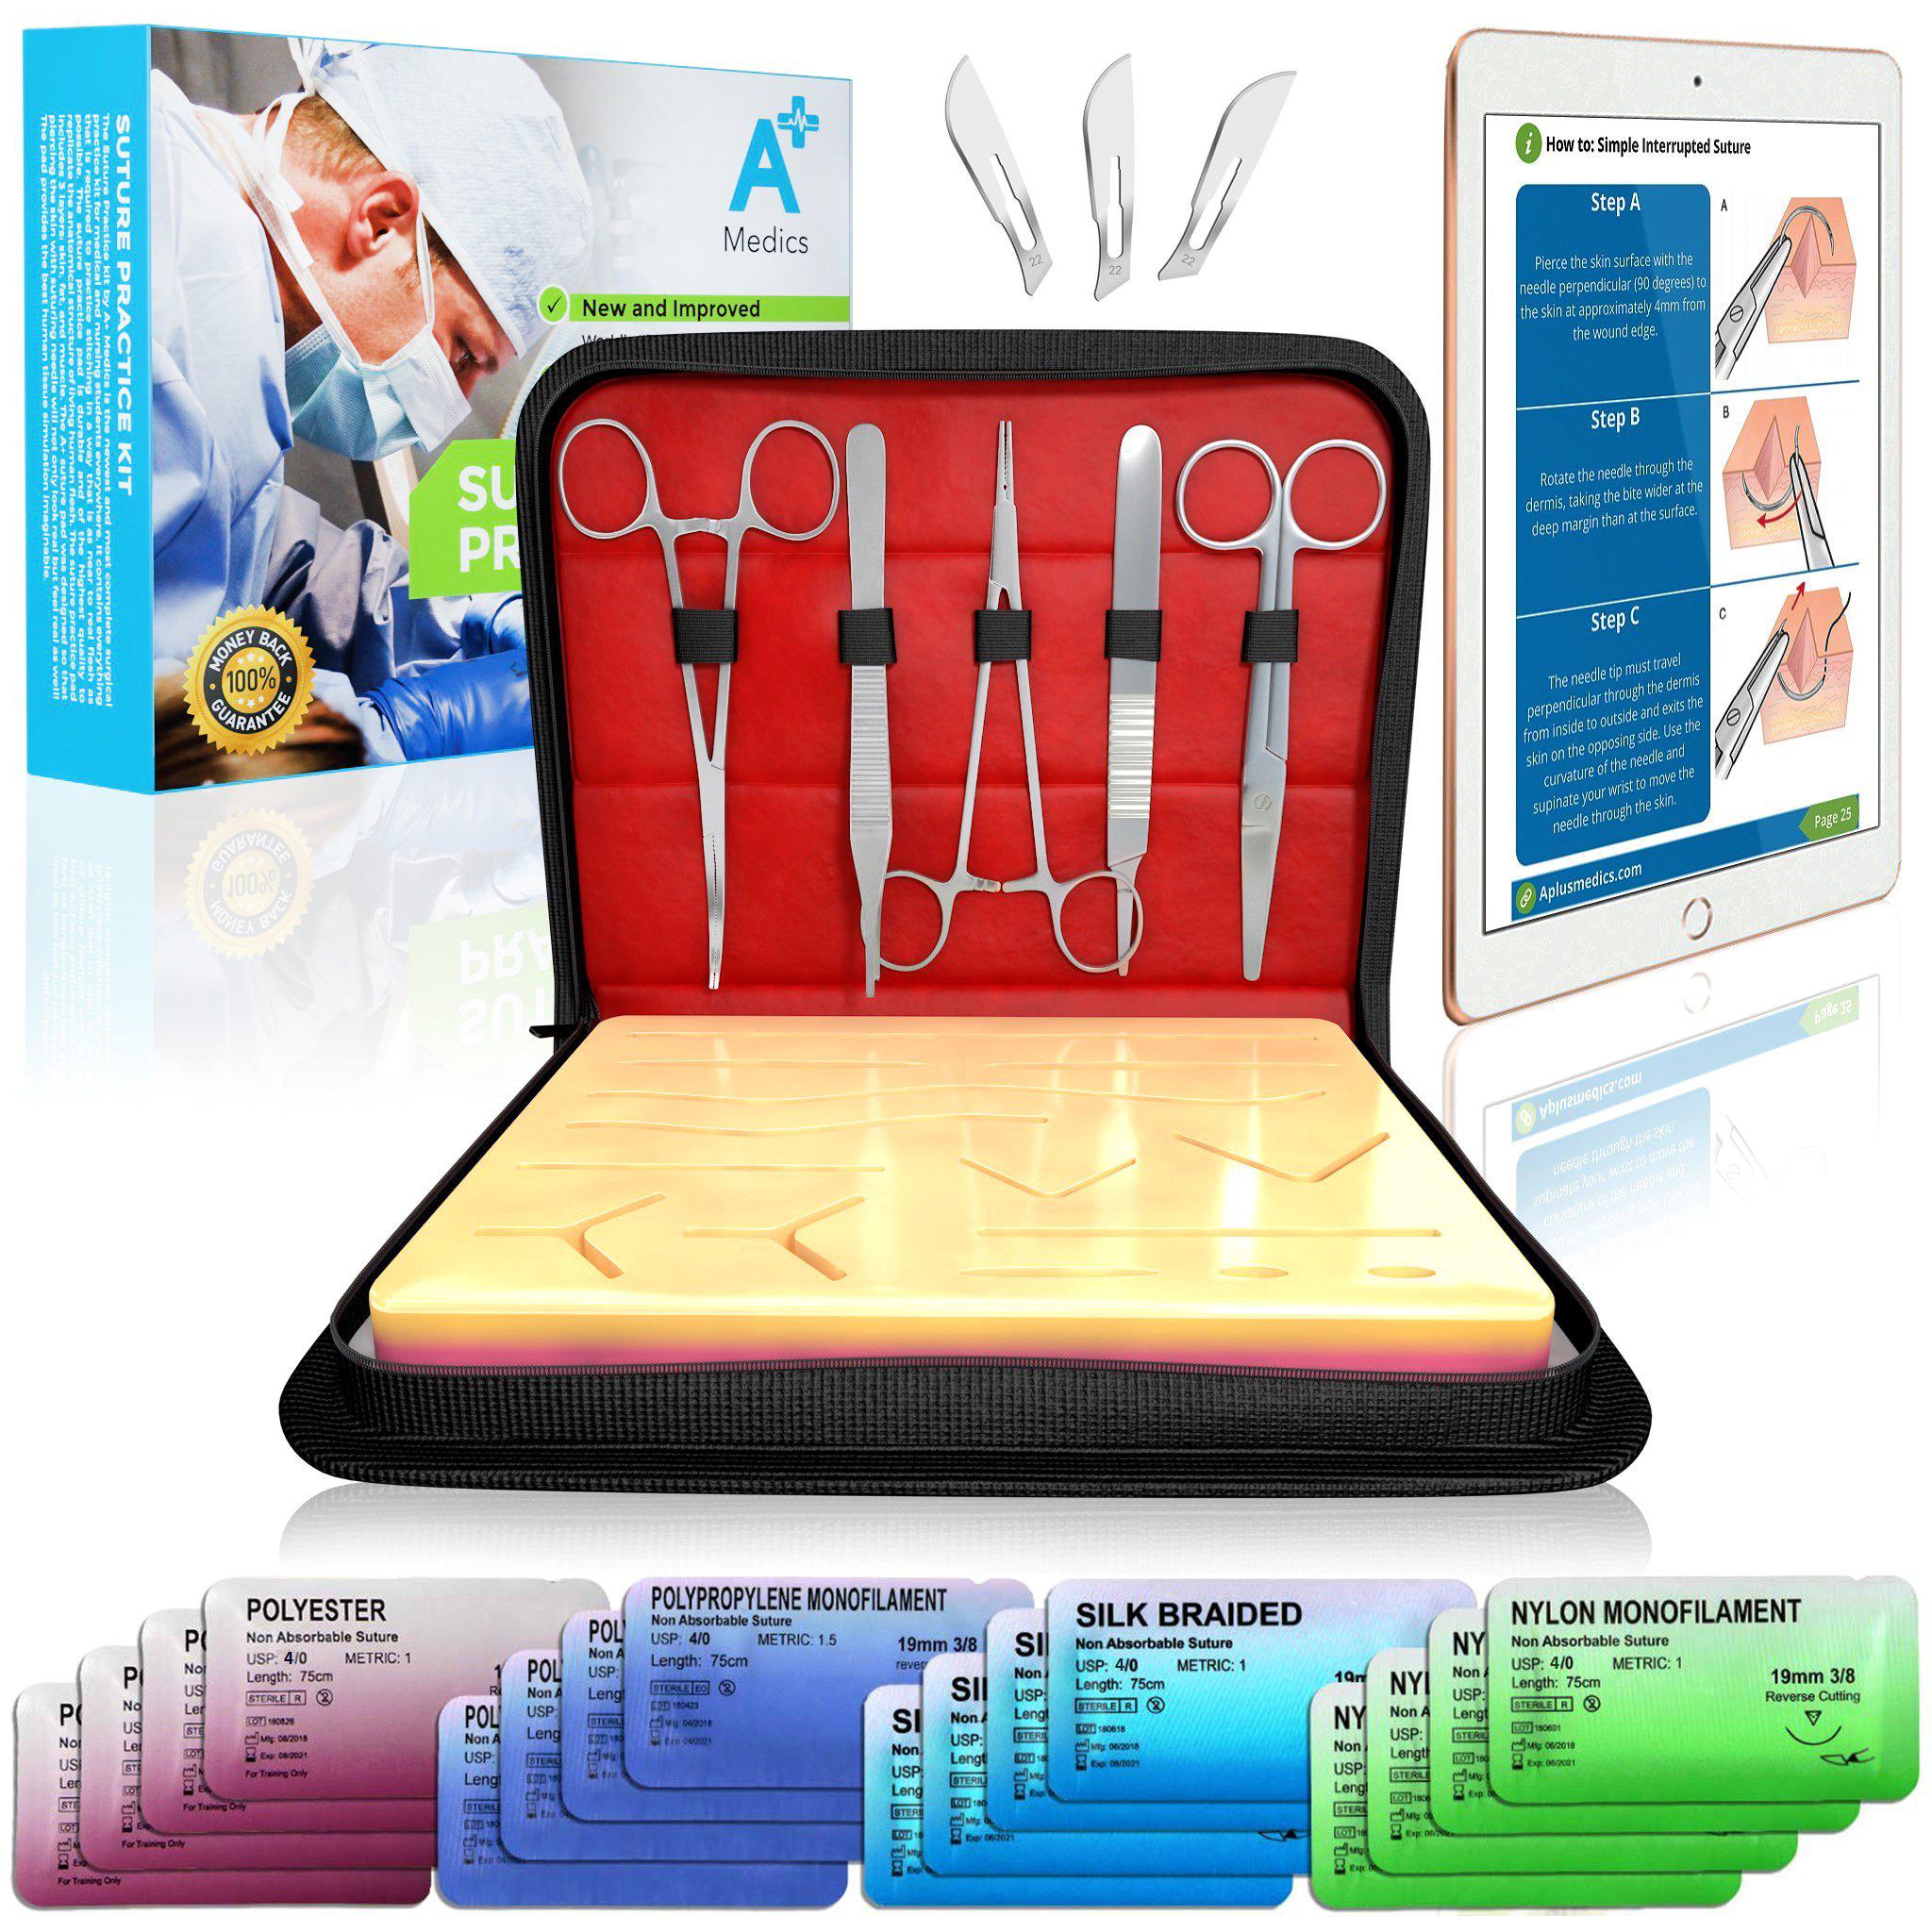 Suture Practice Kit by A Plus Medics